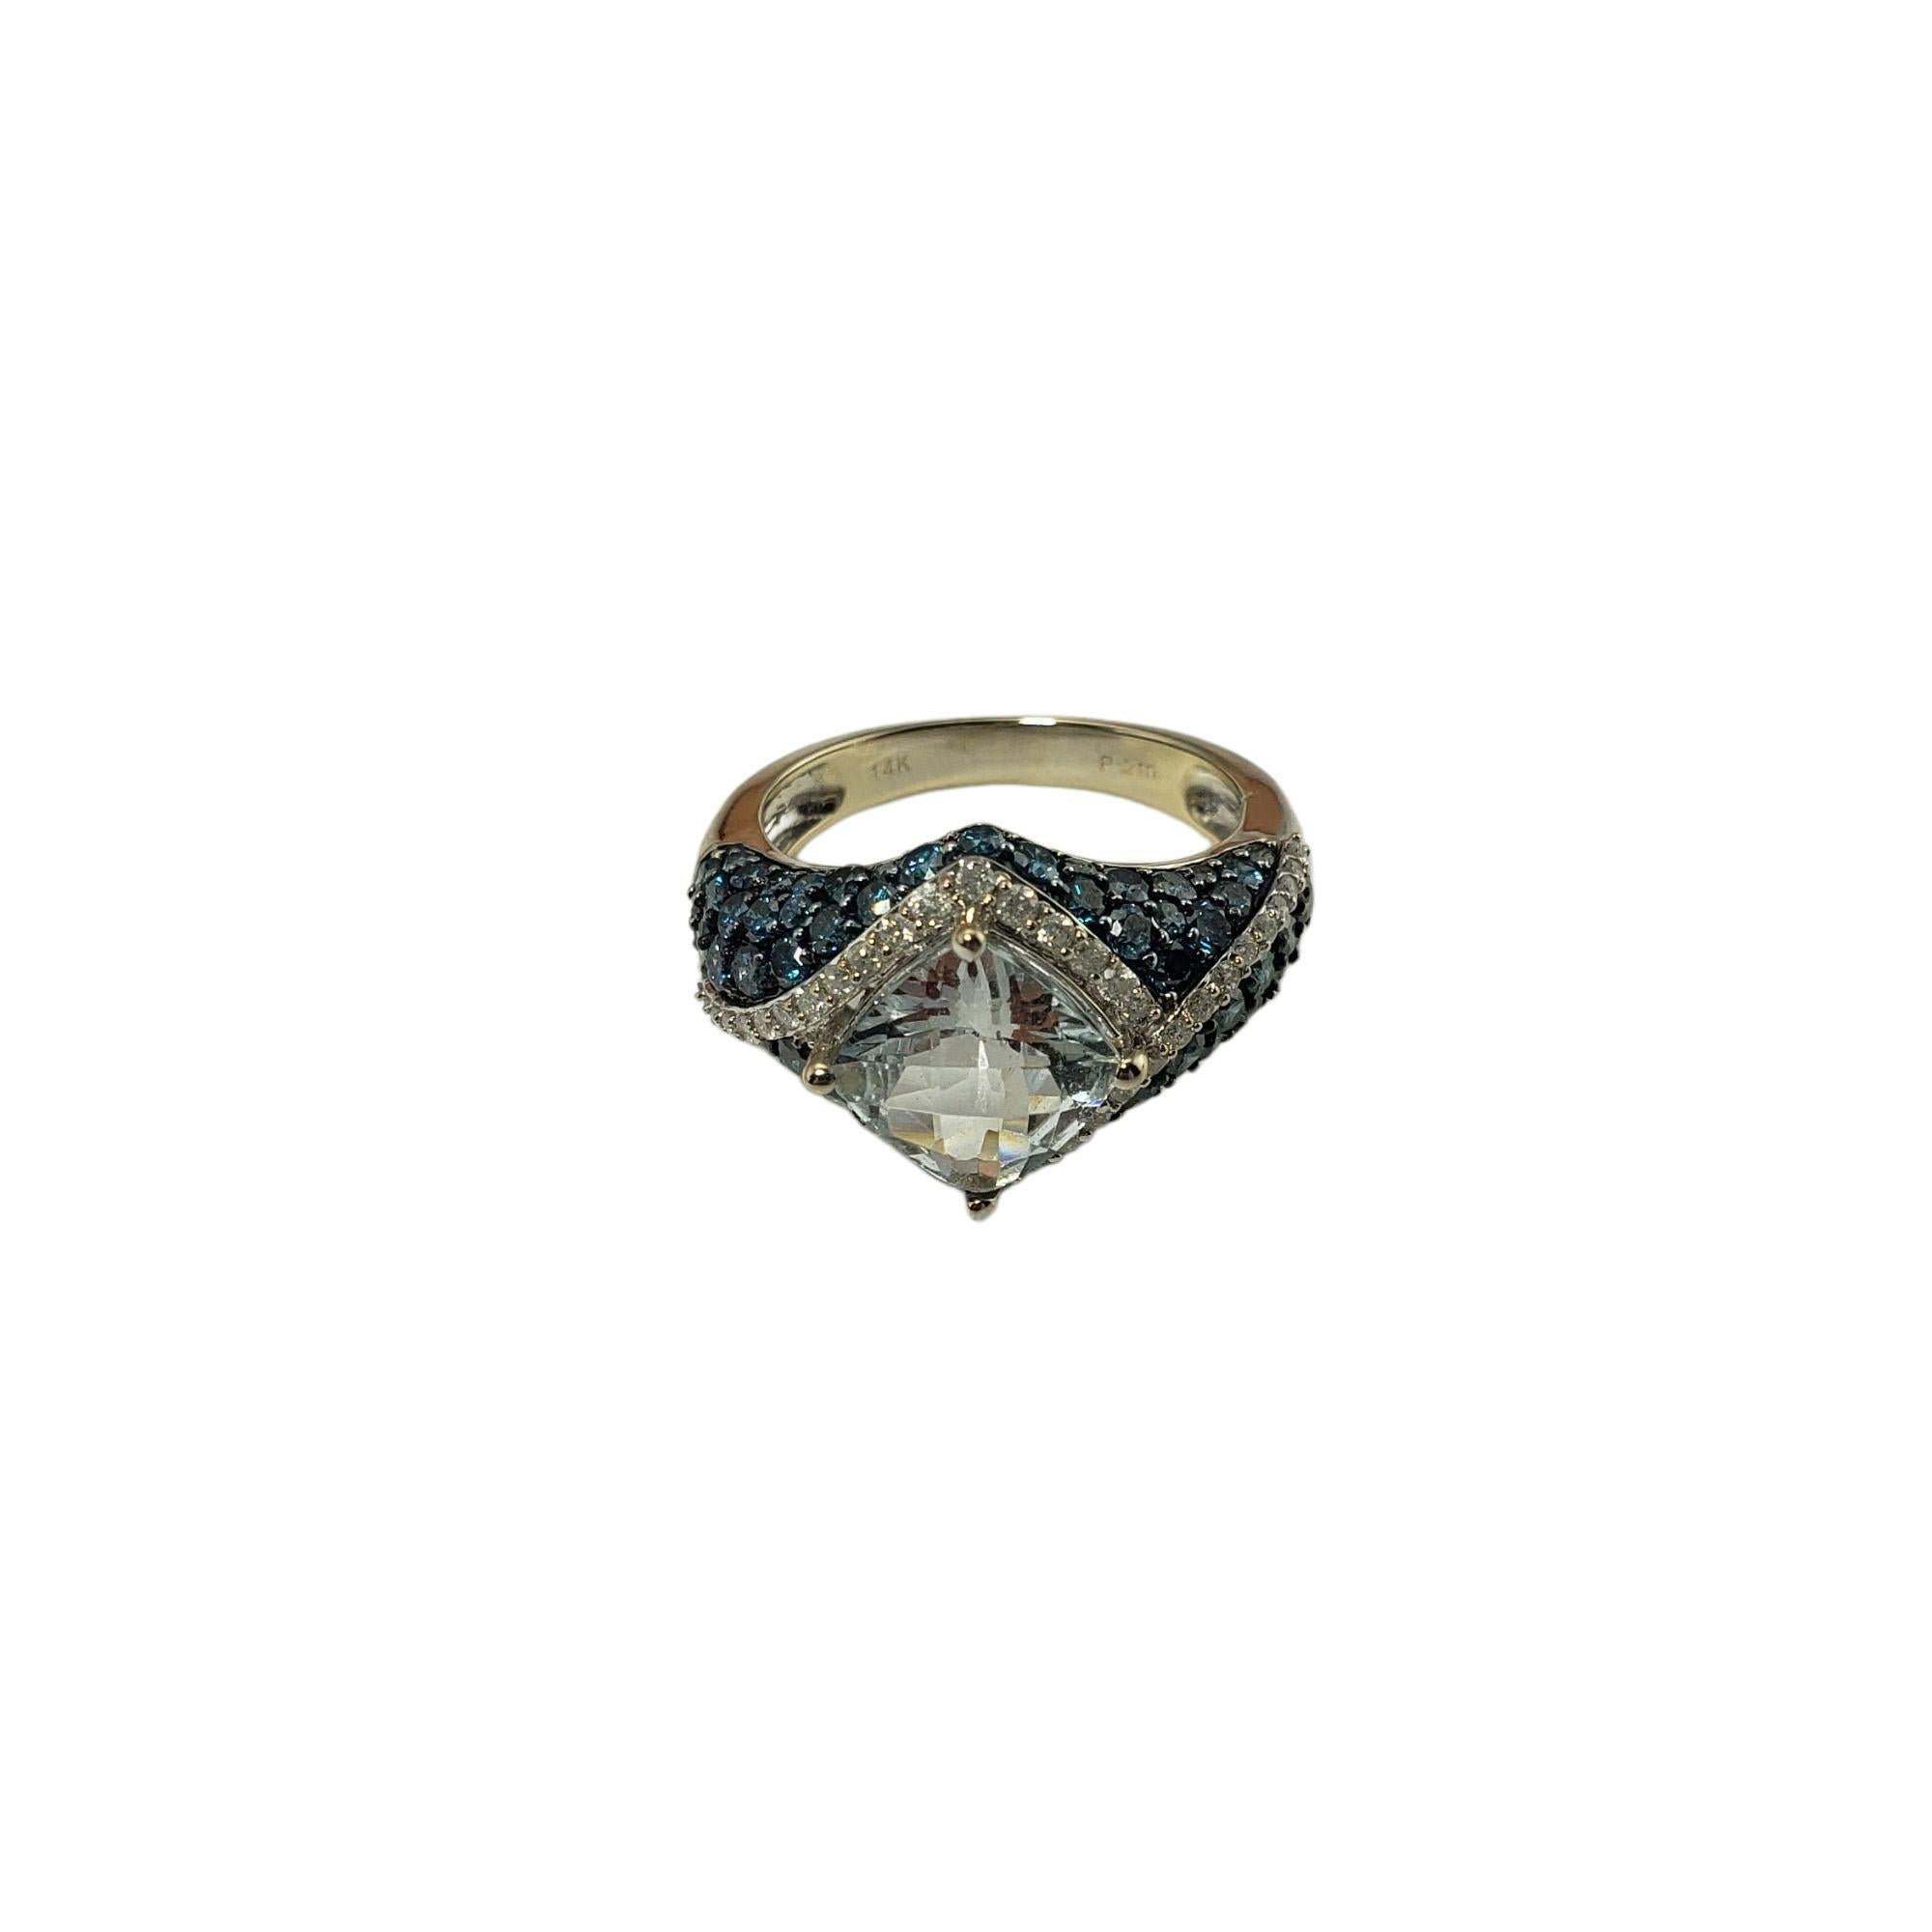 Vintage 14 Karat White Gold White Topaz and Blue and White Diamond Ring Size 7 JAGi Certified-

This lovely ring features one square cushion cut white topaz, 66 blue color enhanced diamonds and 40 round brilliant cut white diamonds set in classic